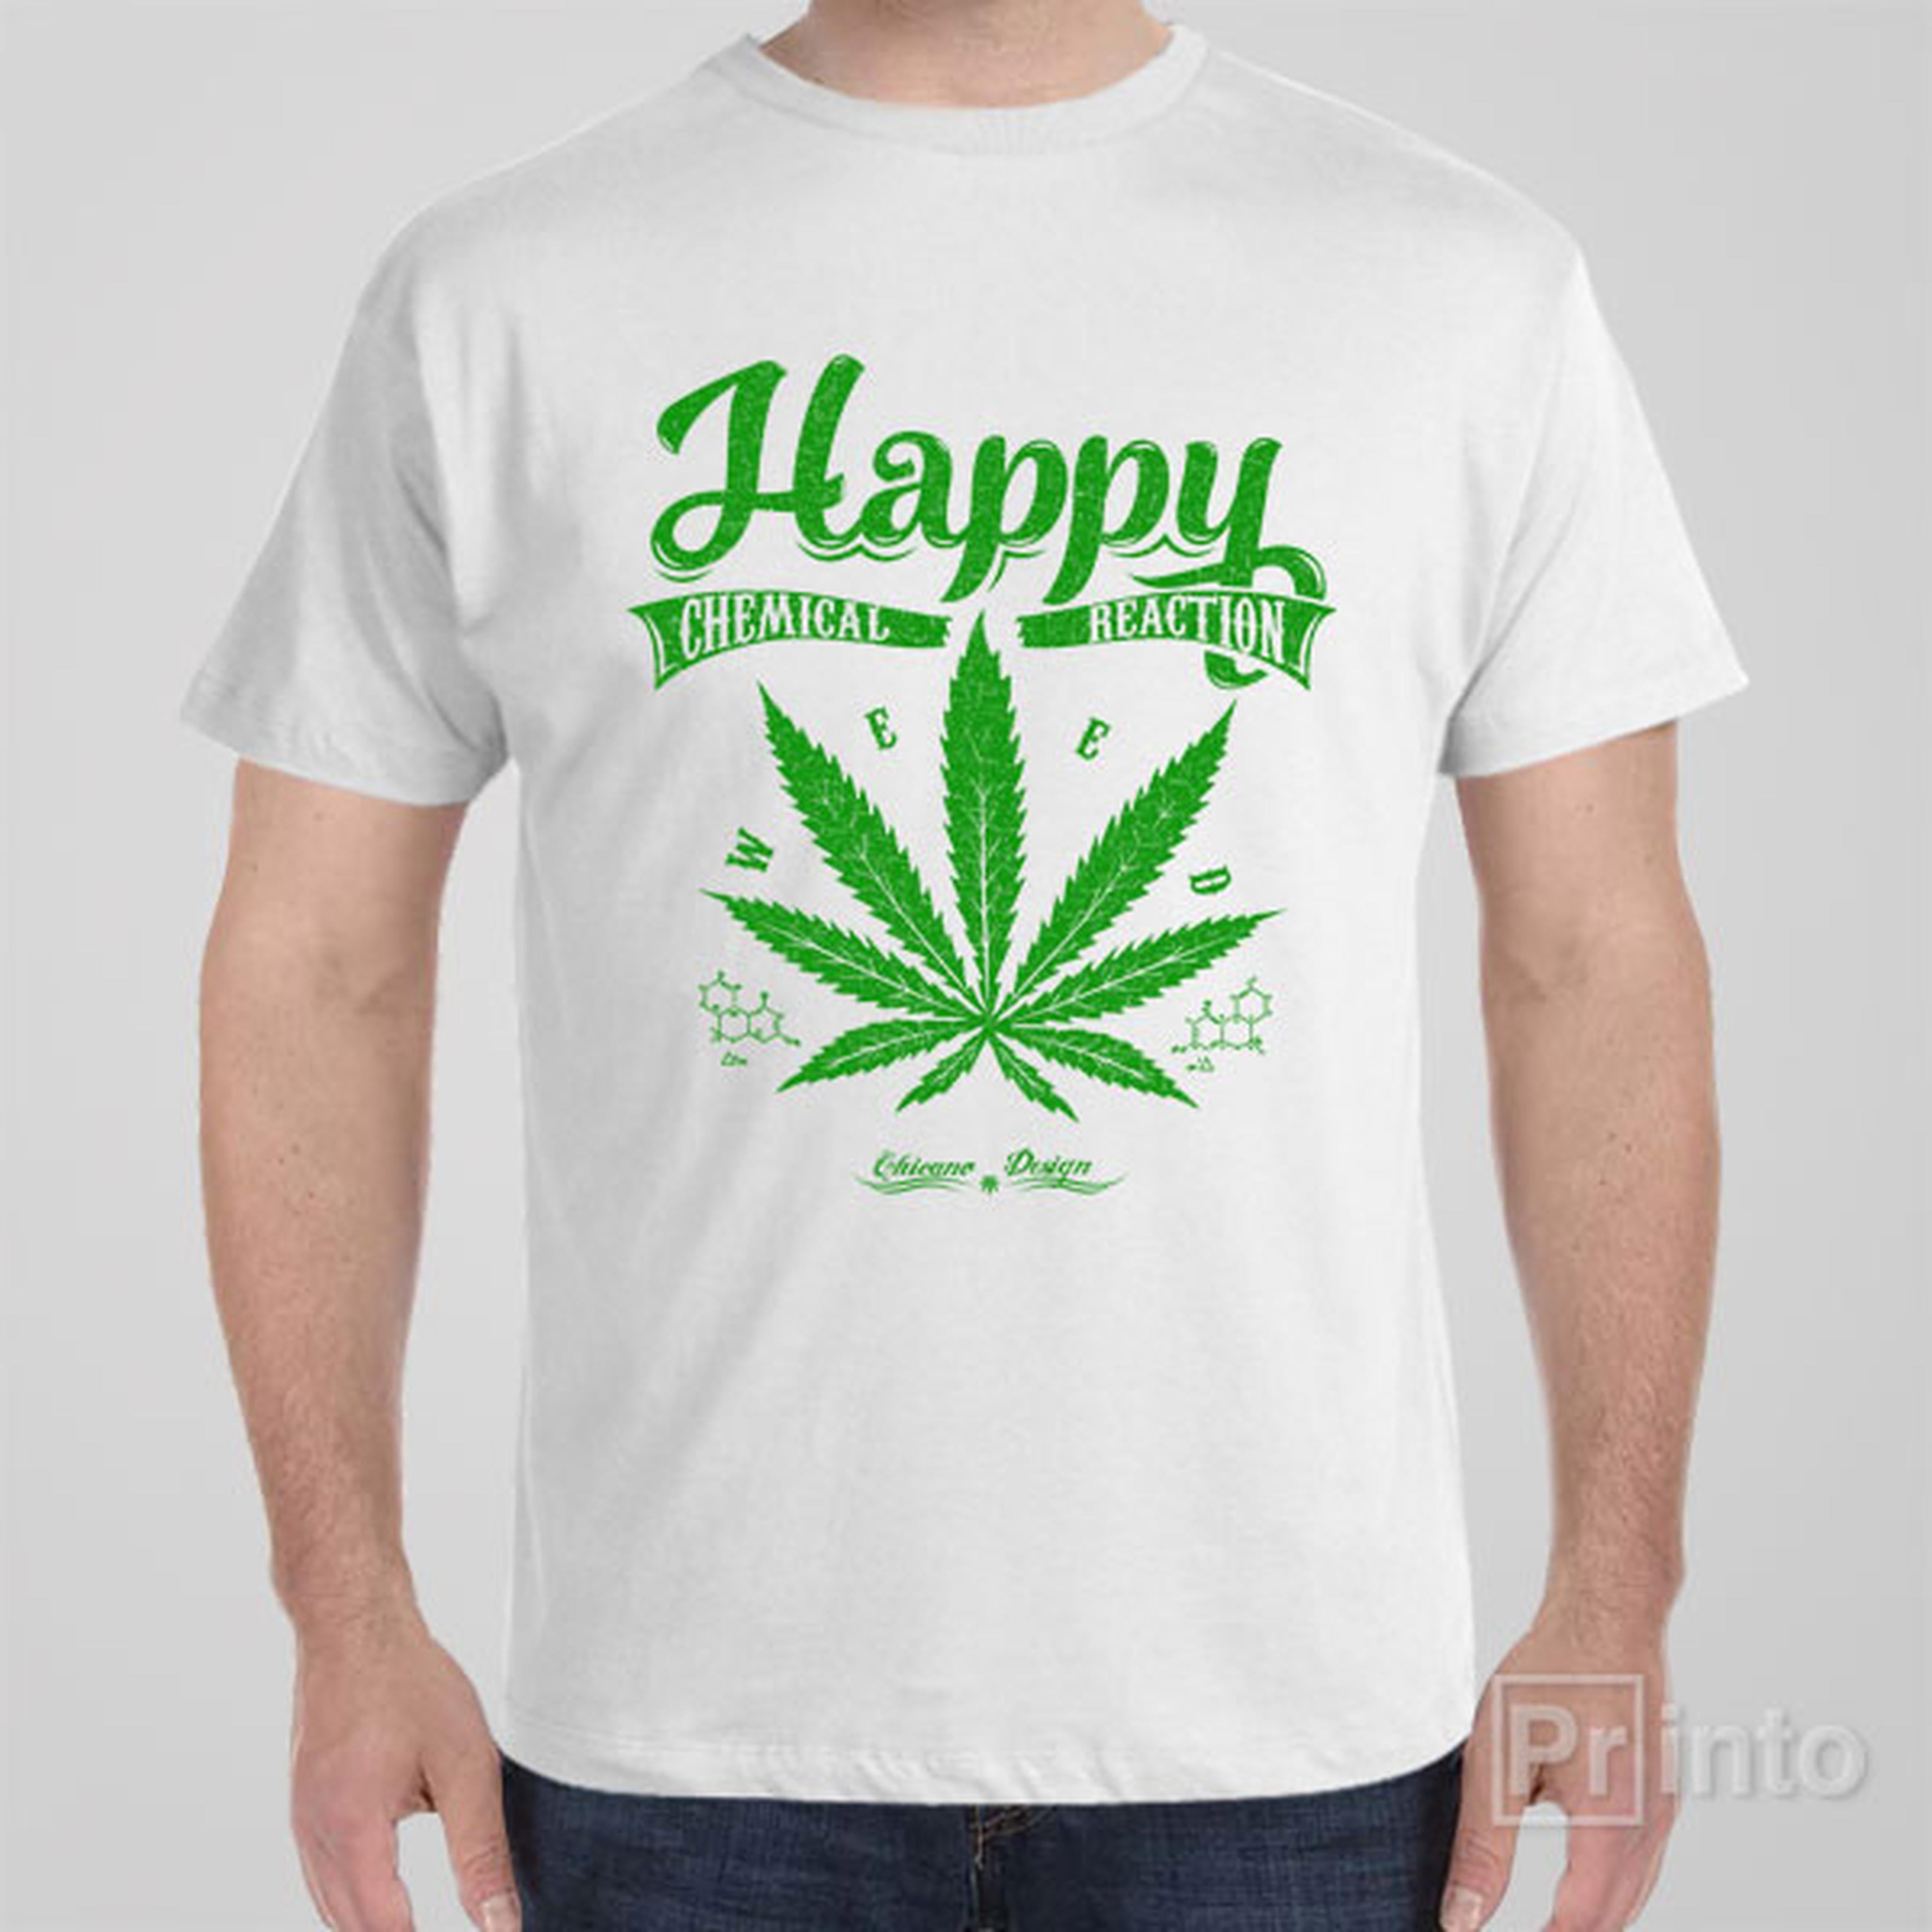 happy-chemical-reaction-t-shirt